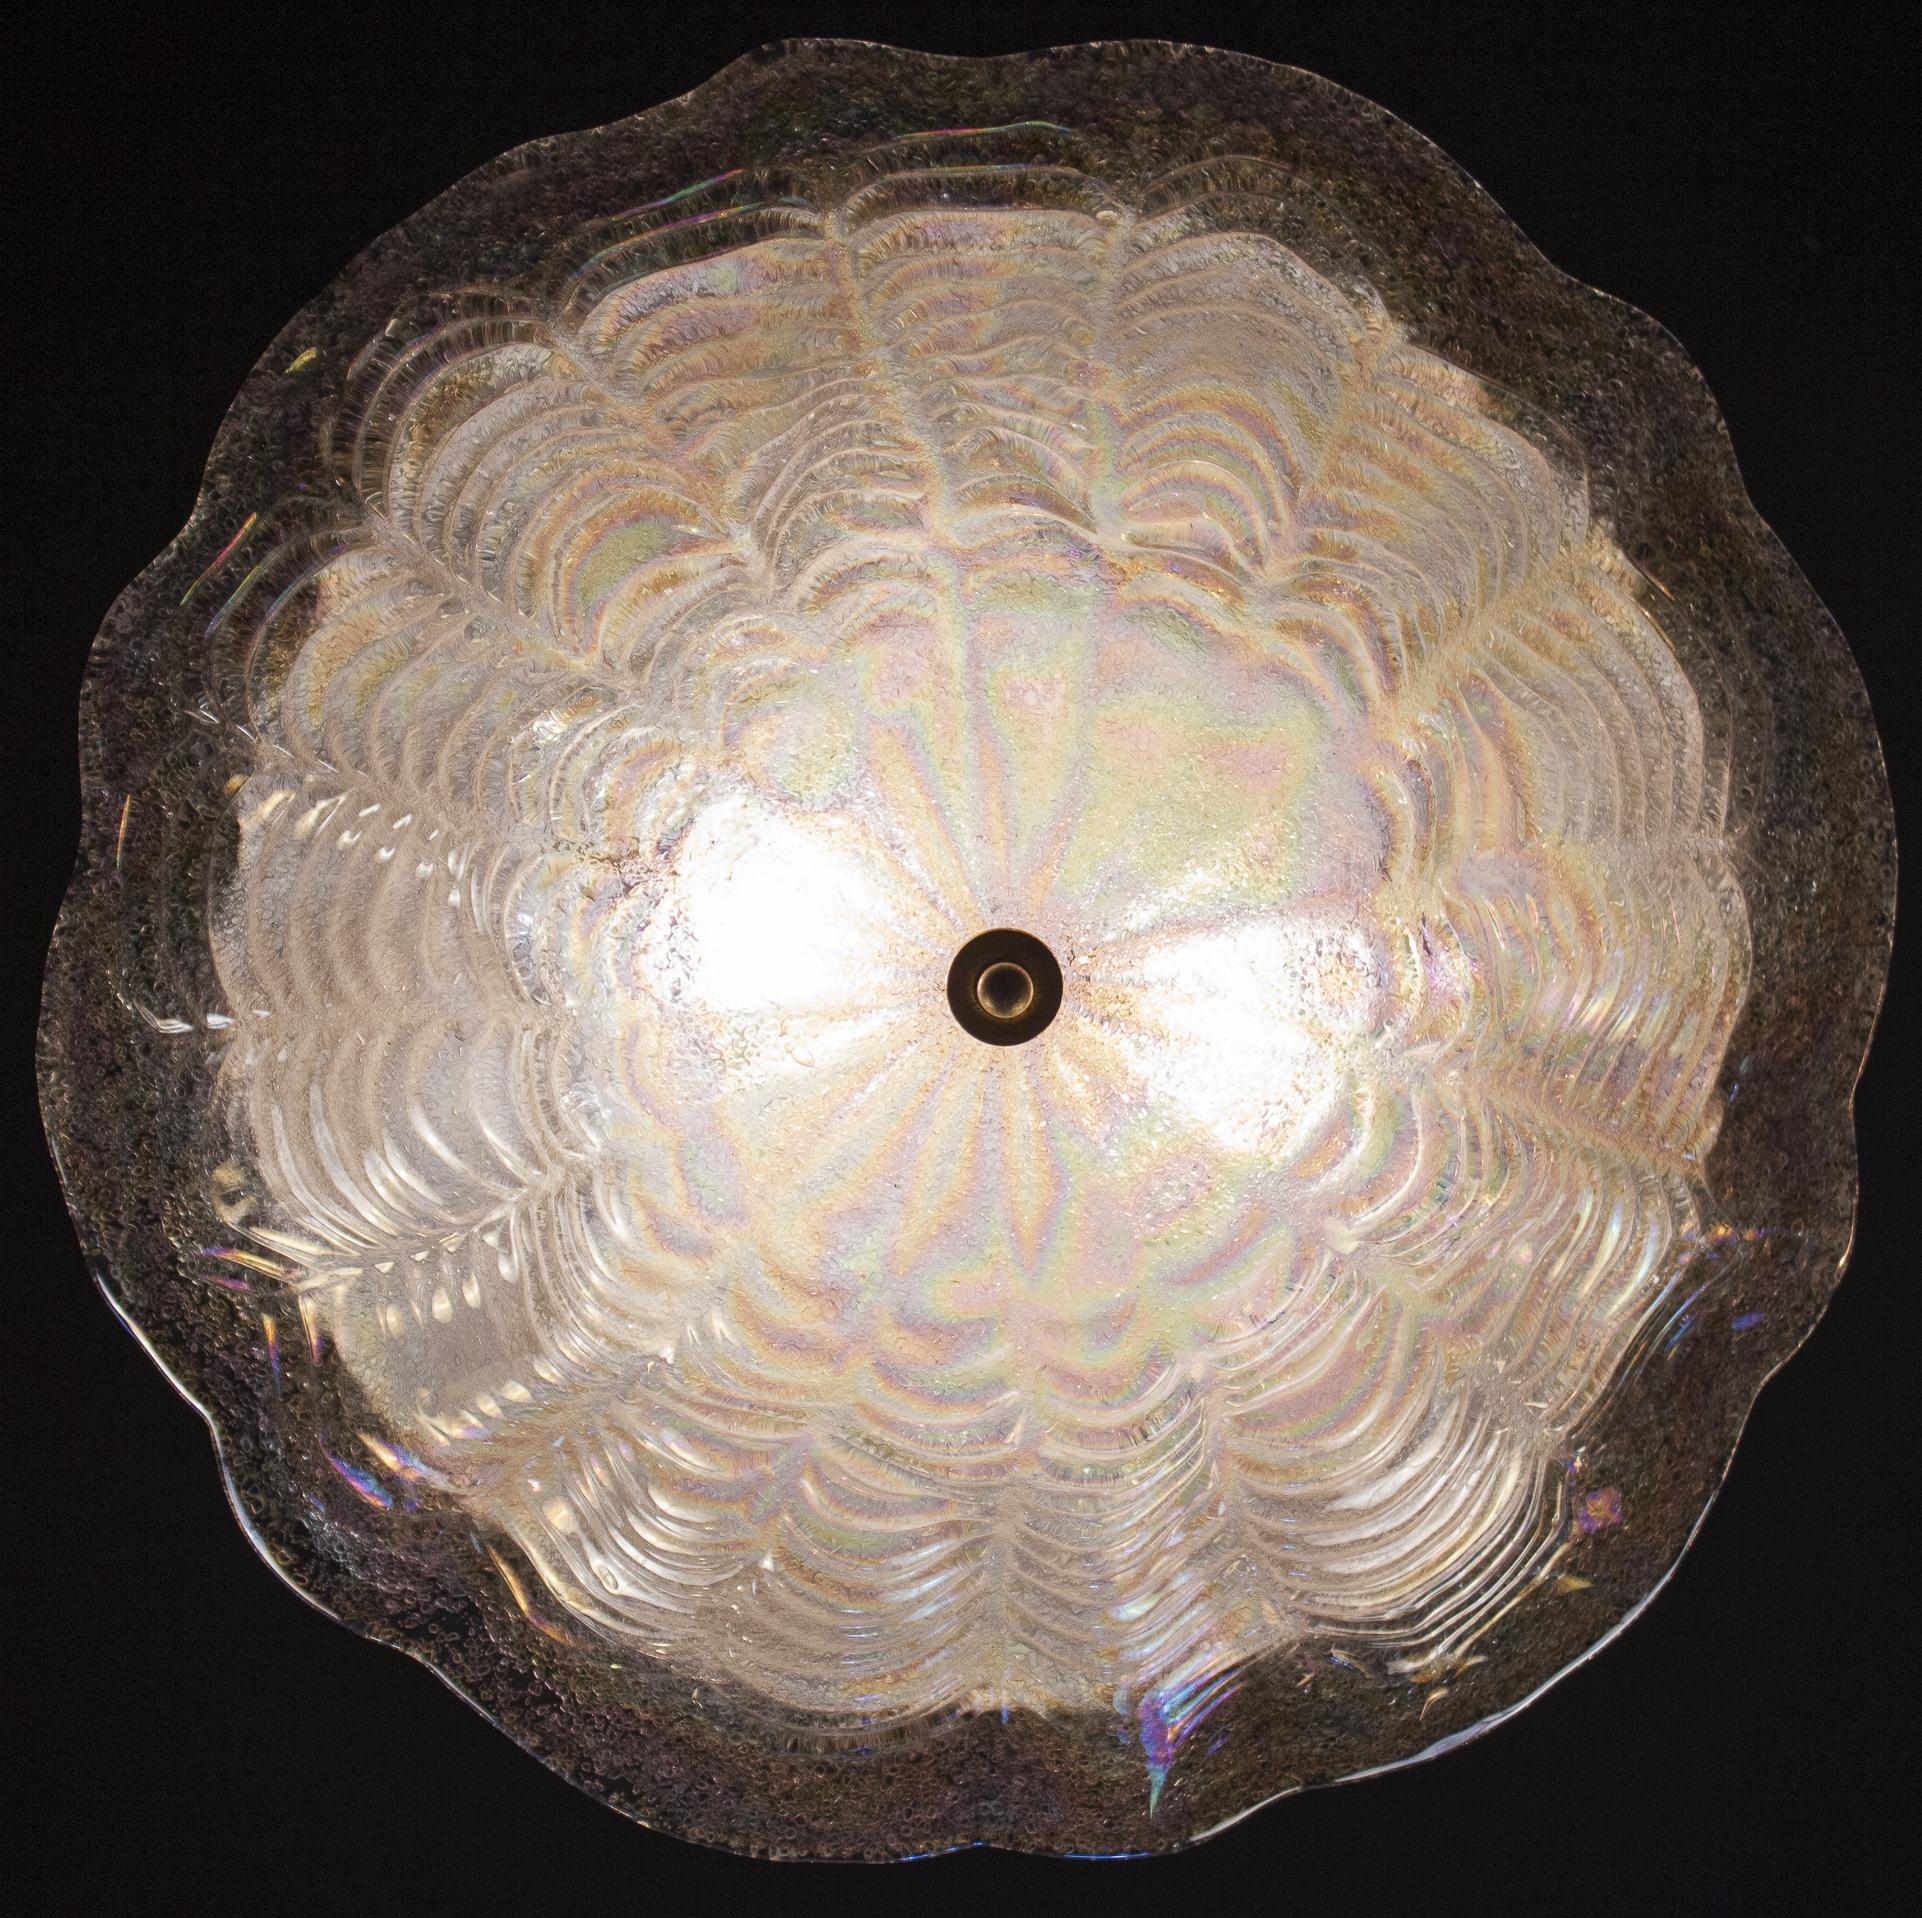 This amazing ceiling light realized in a pure Iridescent Murano glass, giving a special light effect even when switched off.
Two E 27 lights spread a magical light.

Measures: Diameter 55 cm, height 20 cm.